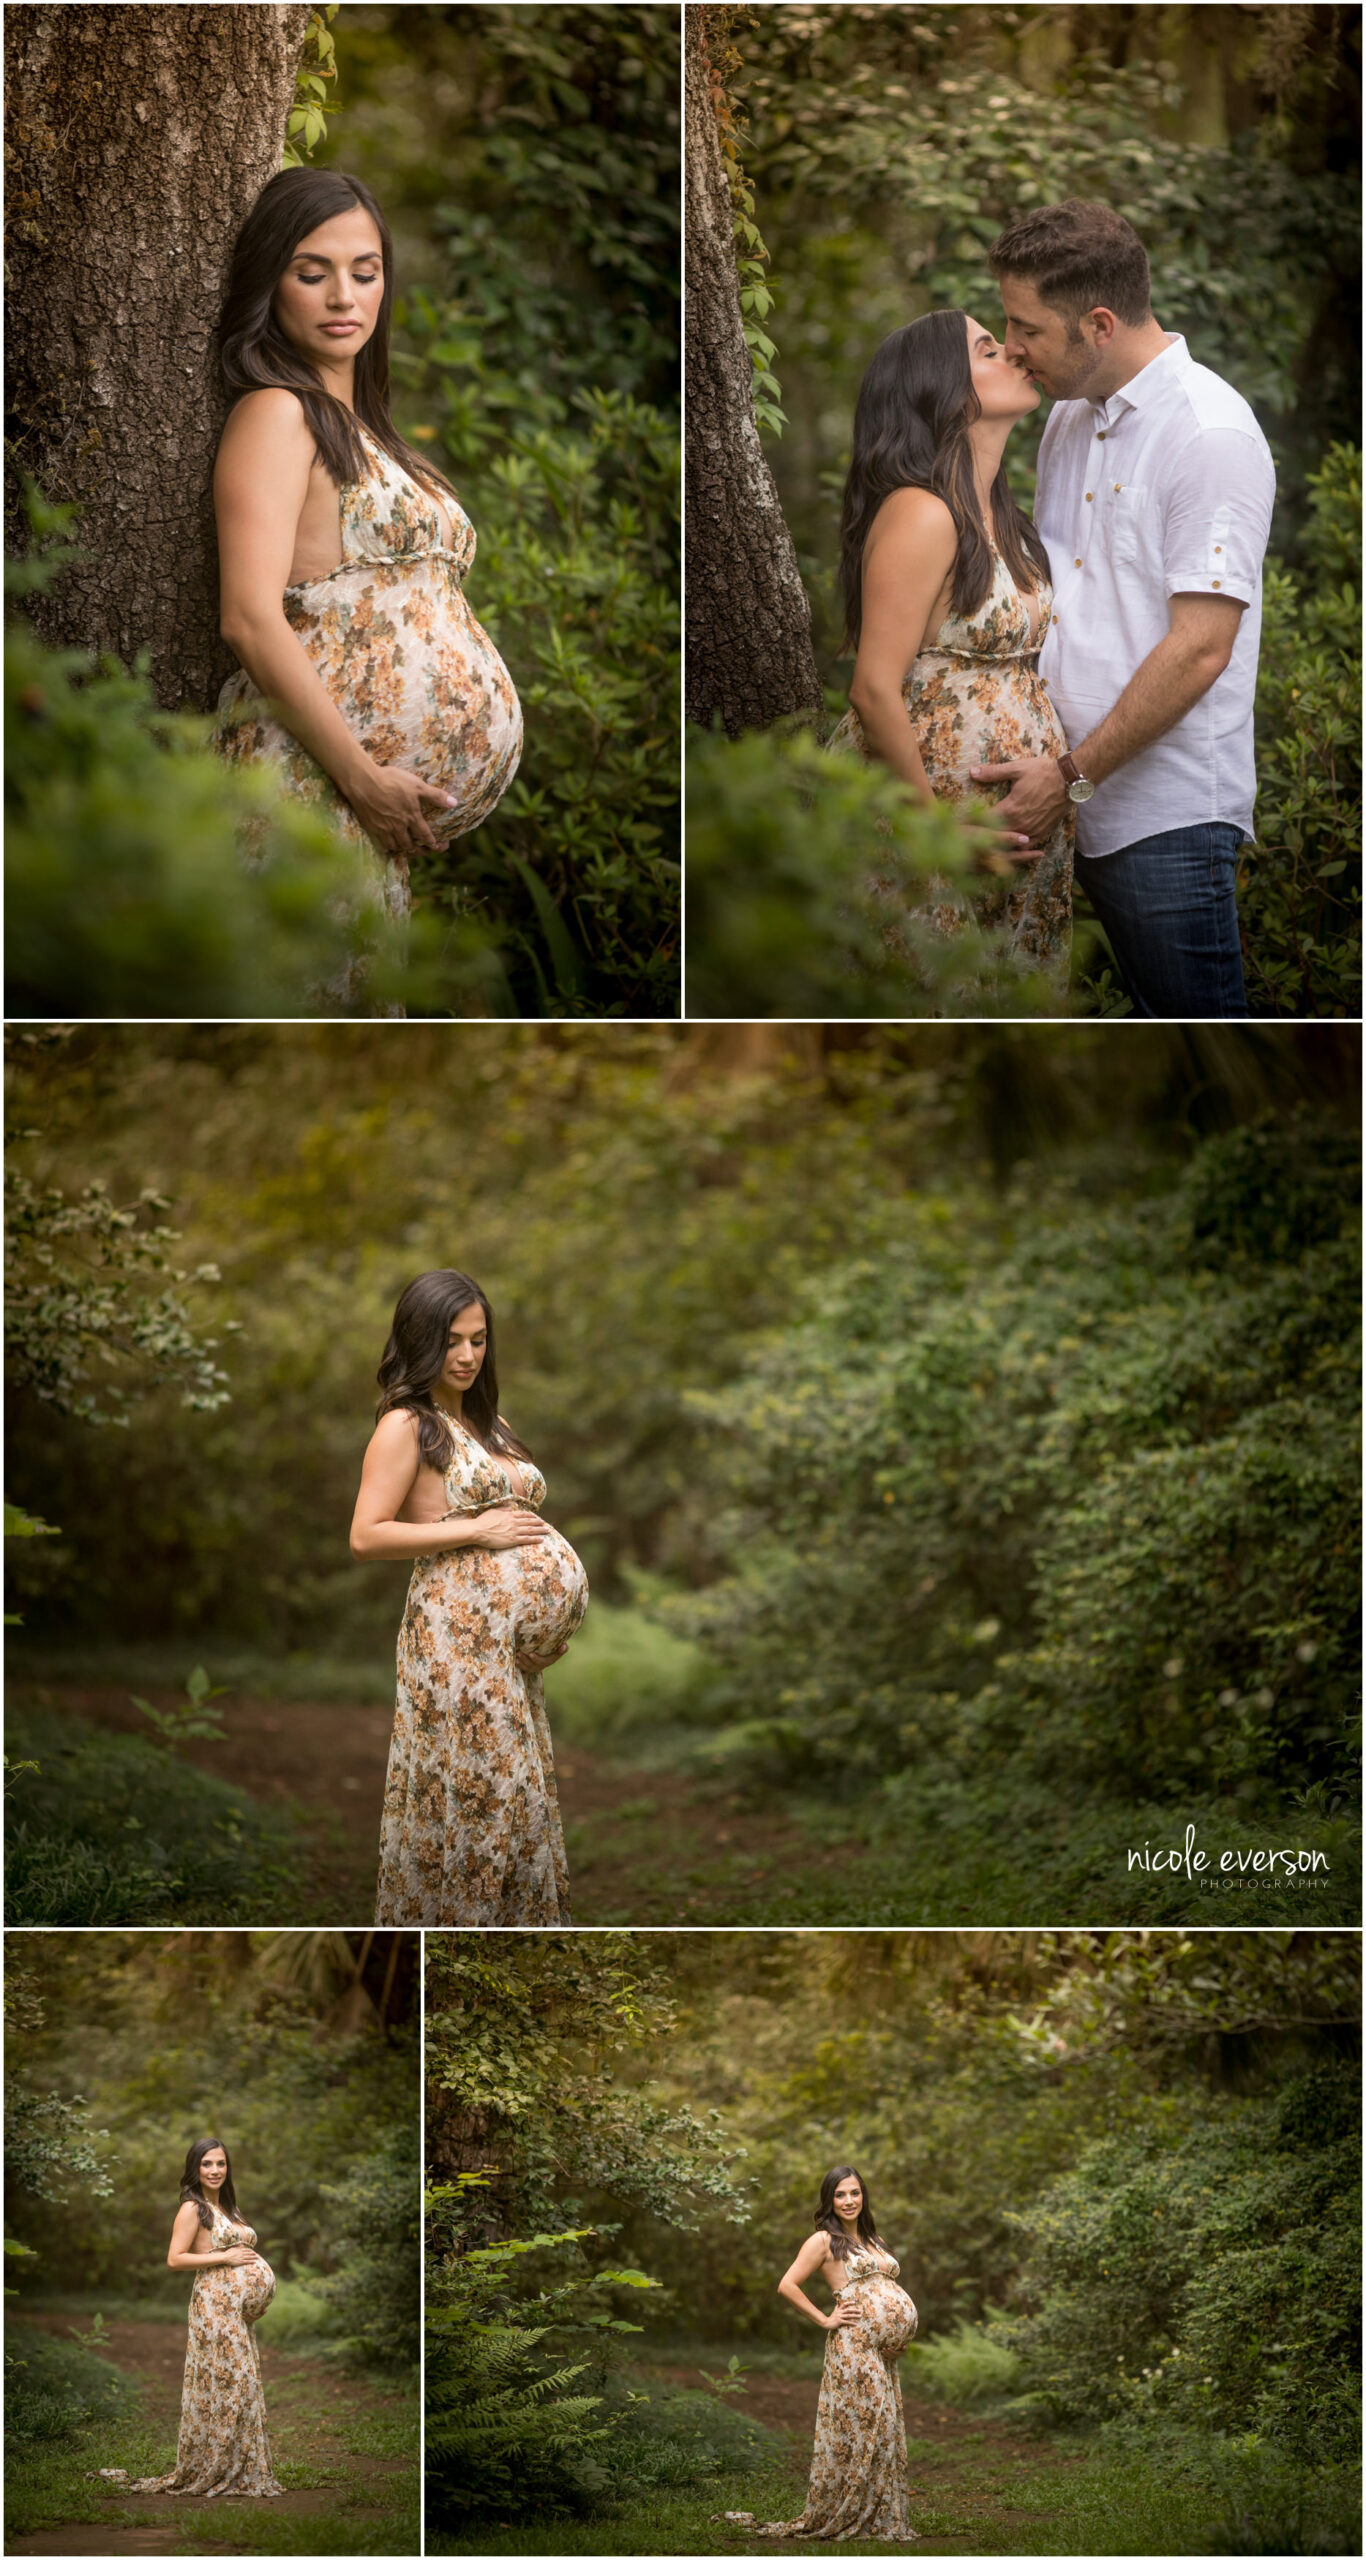 Maternity Poses: These 3 Simple Setups are All You Need